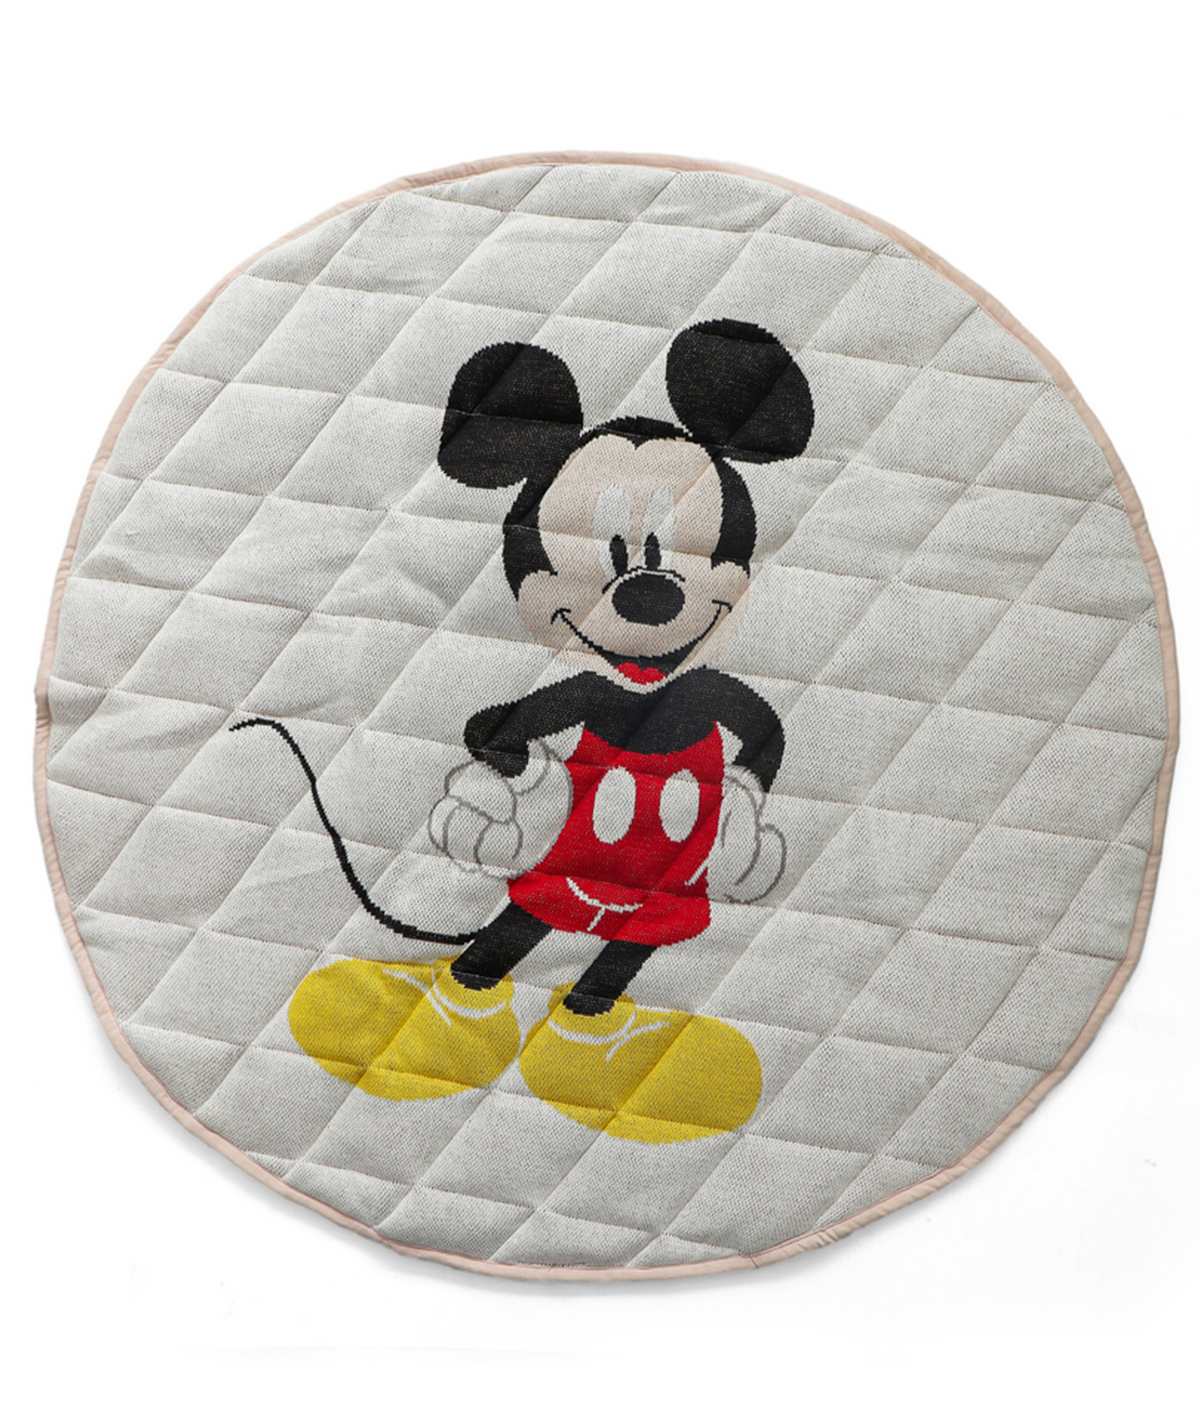 Classic Mickey Mouse - Disney Cotton Knitted Quilted Anti skid Playmat for Babies